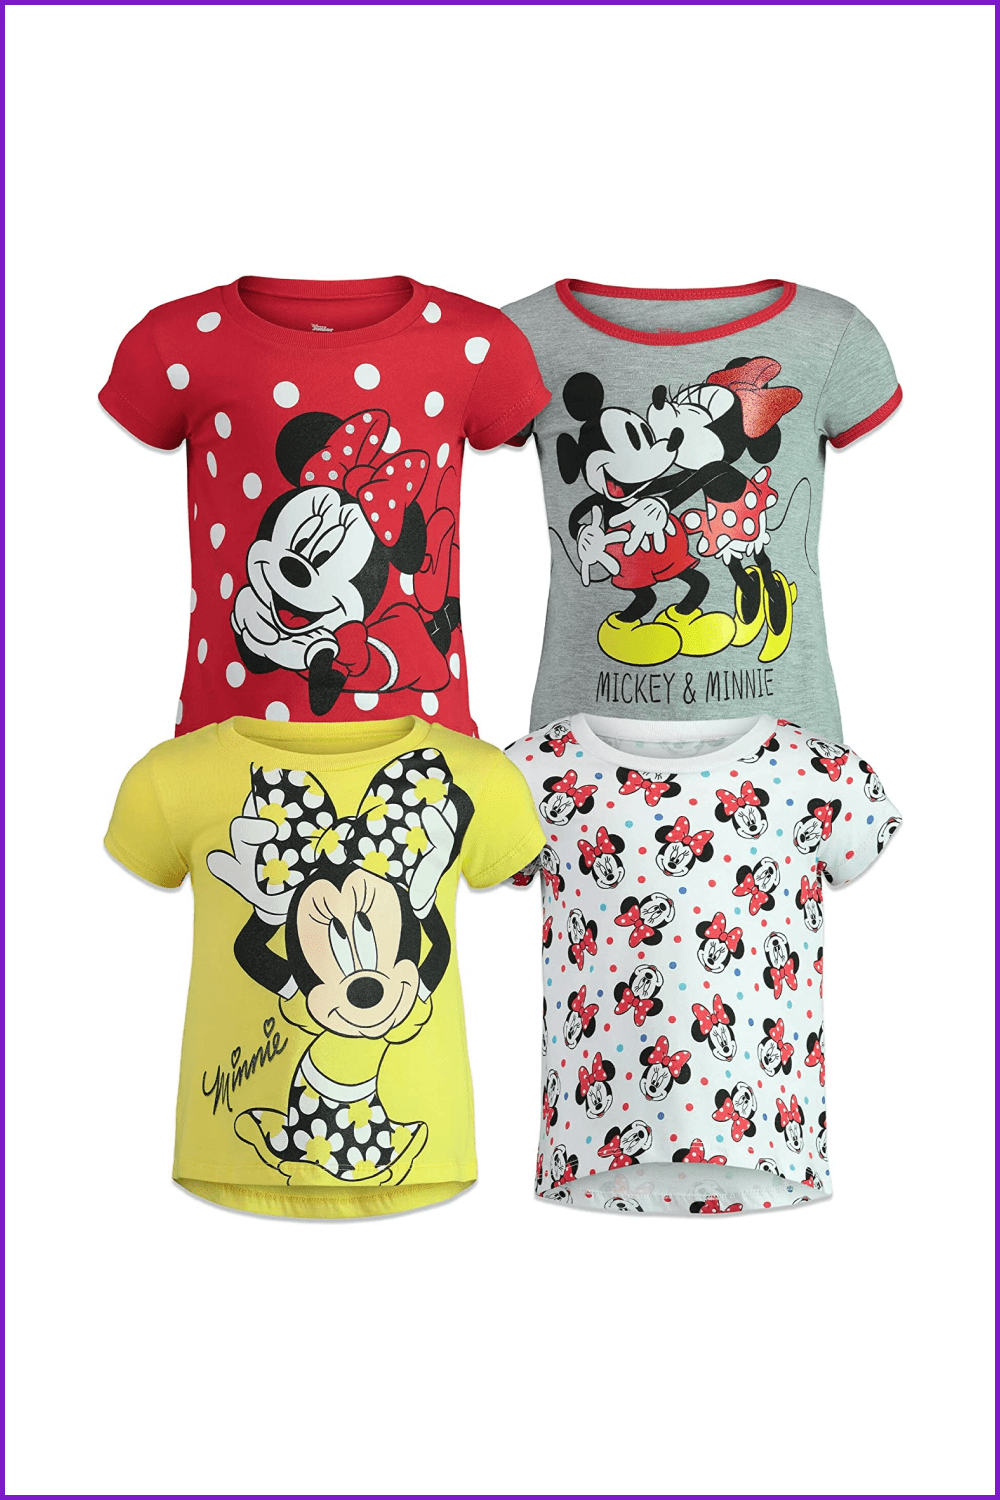 Disney Minnie Mouse Girls’ 4 Pack Short Sleeve T-Shirts.